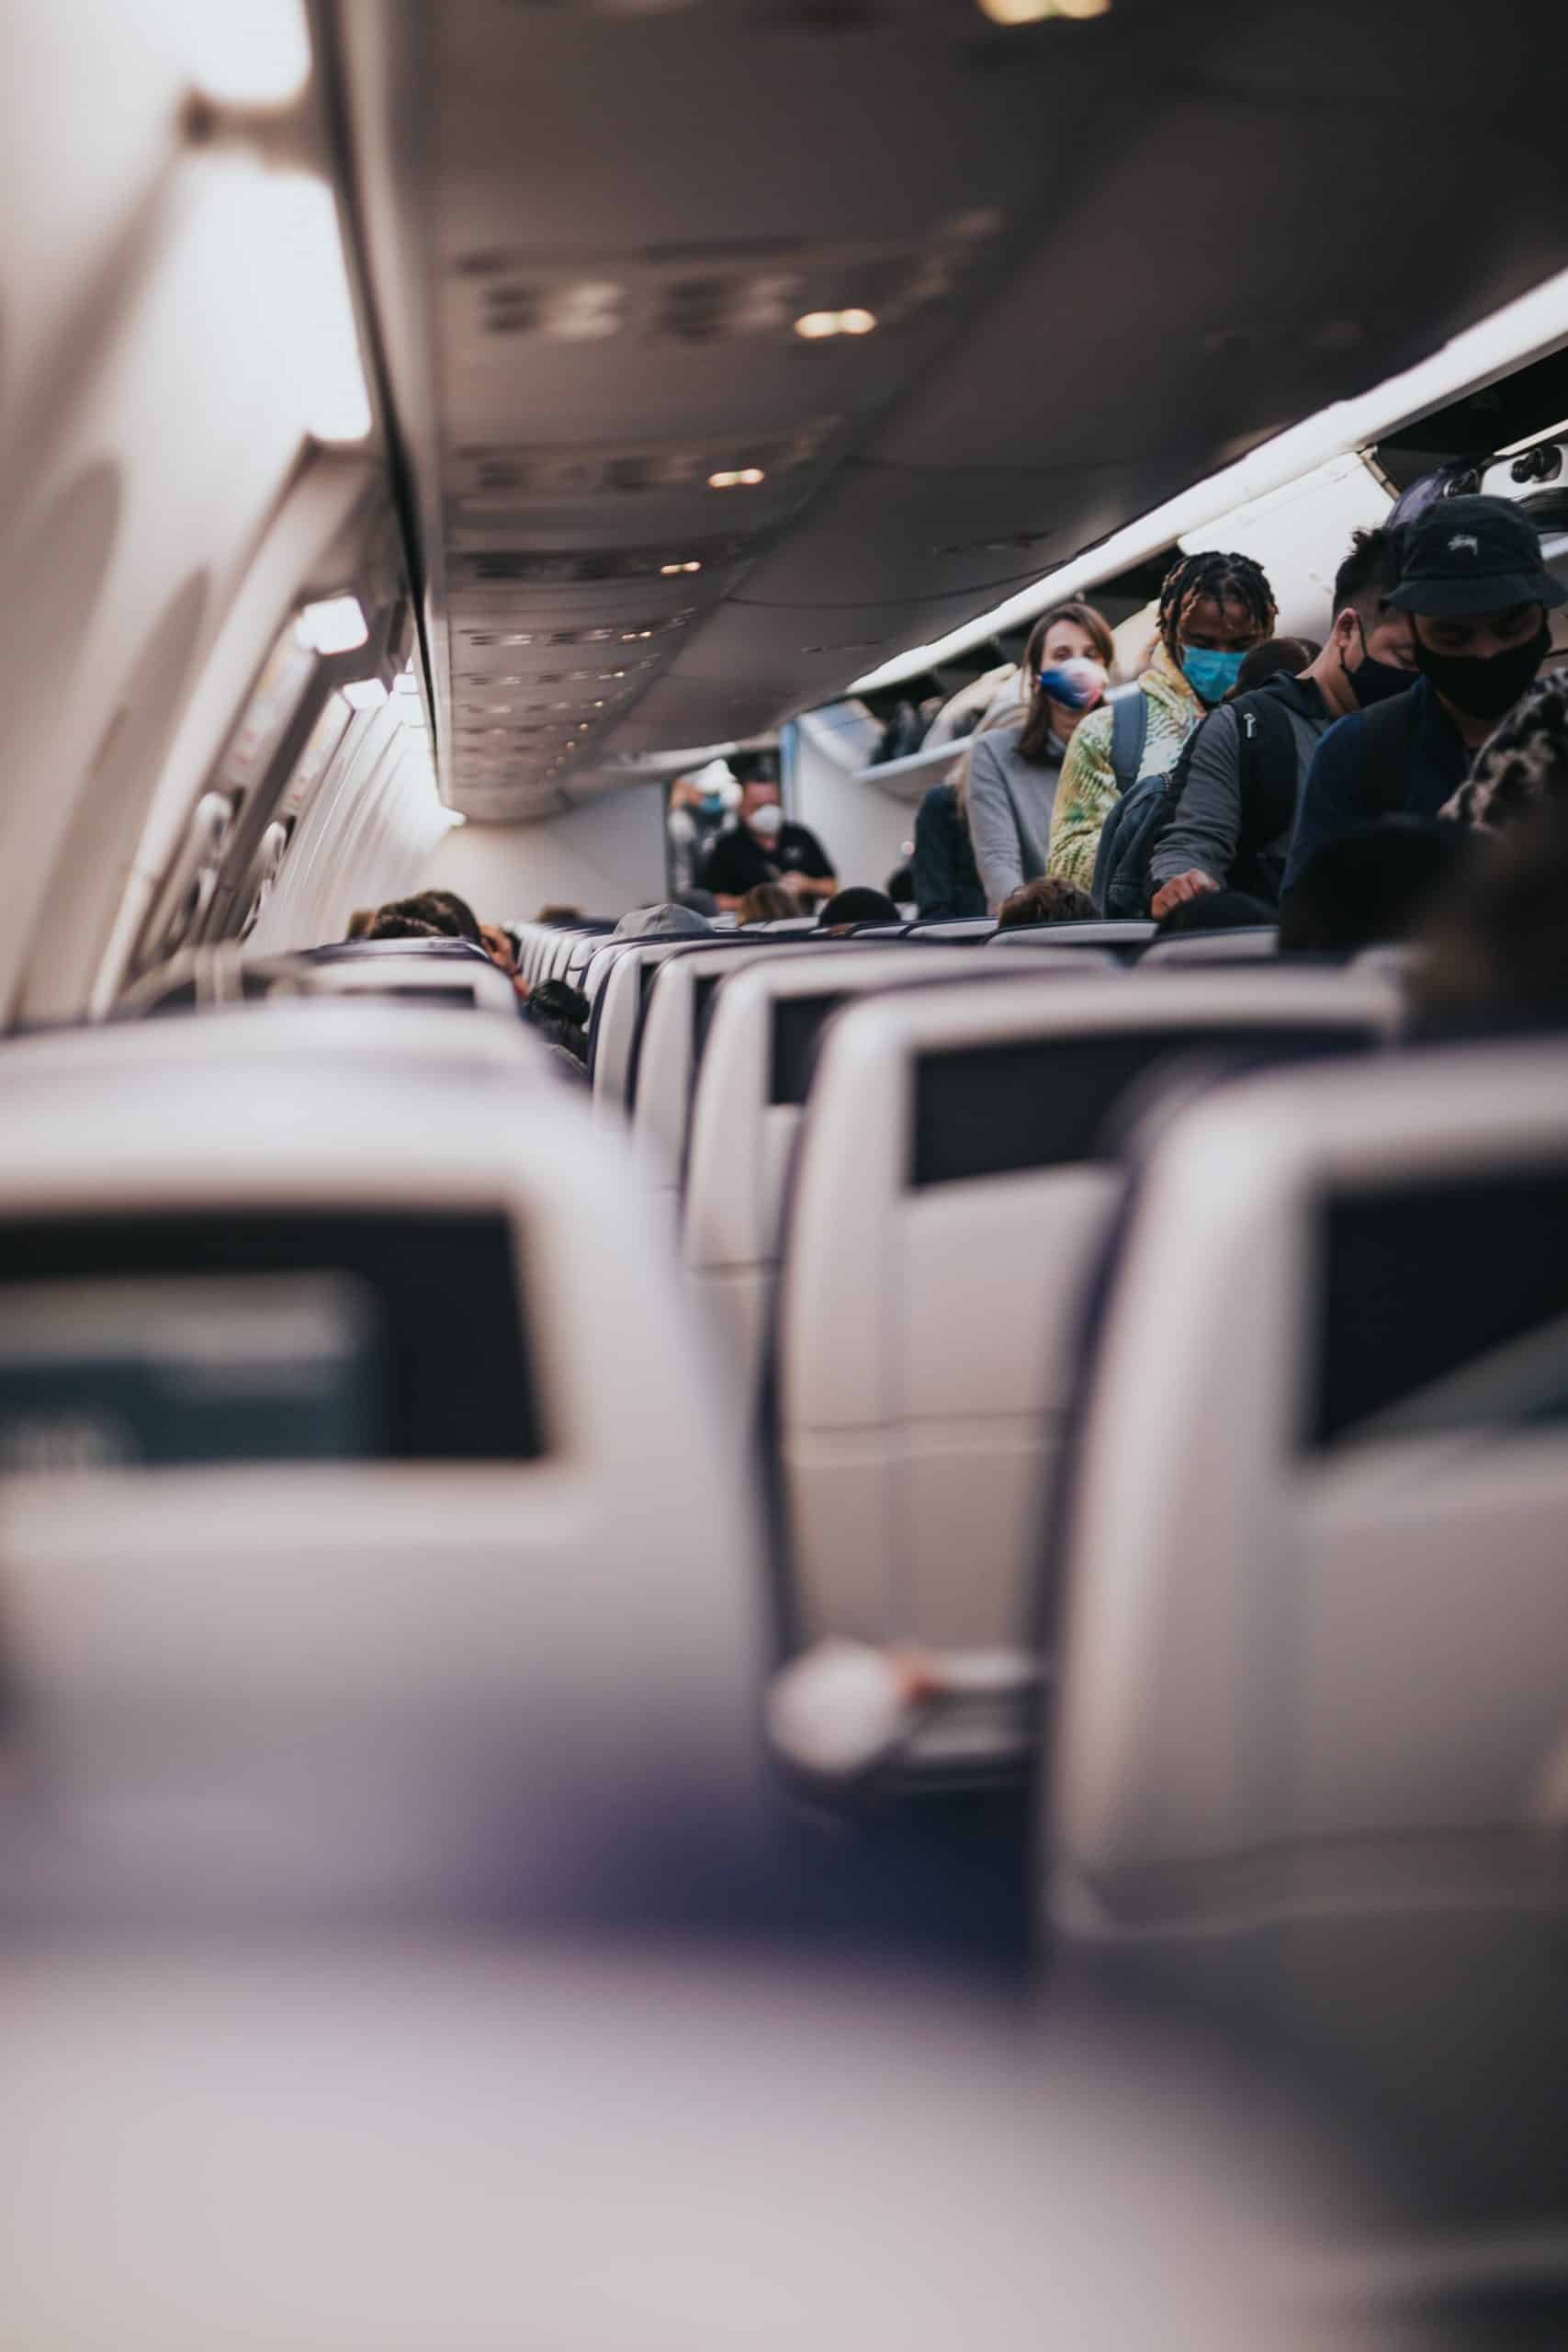 Interior shot of a plane, with passengers lined up to exit